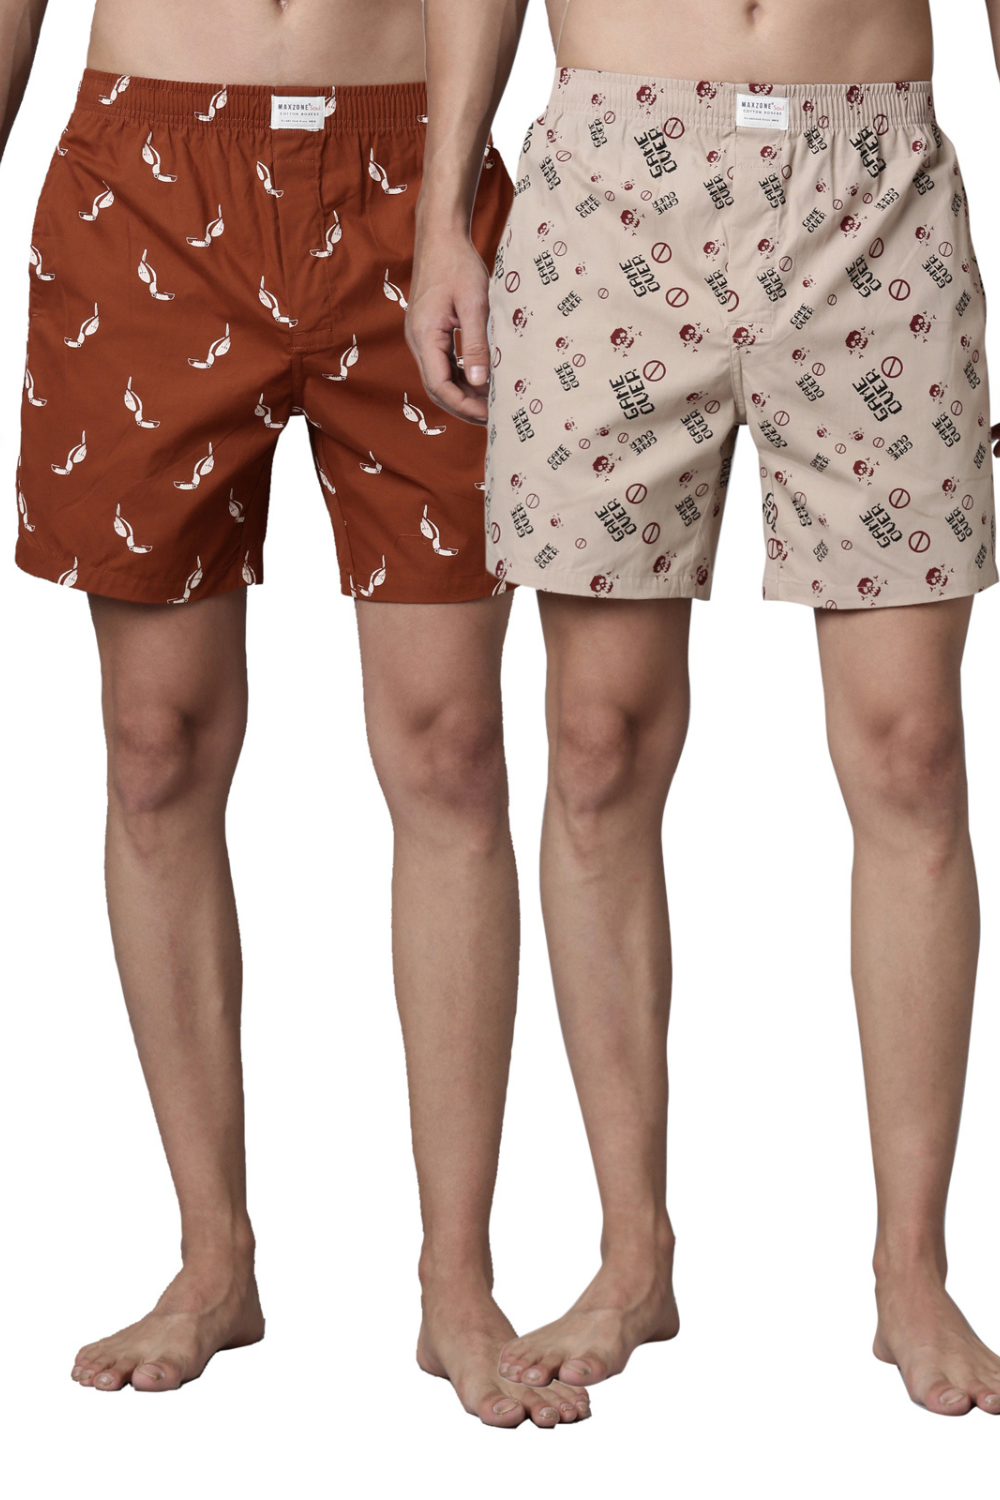 Russet Printed & Sand-Stone Printed 365 Boxers Combo  Maxzone Clothing   